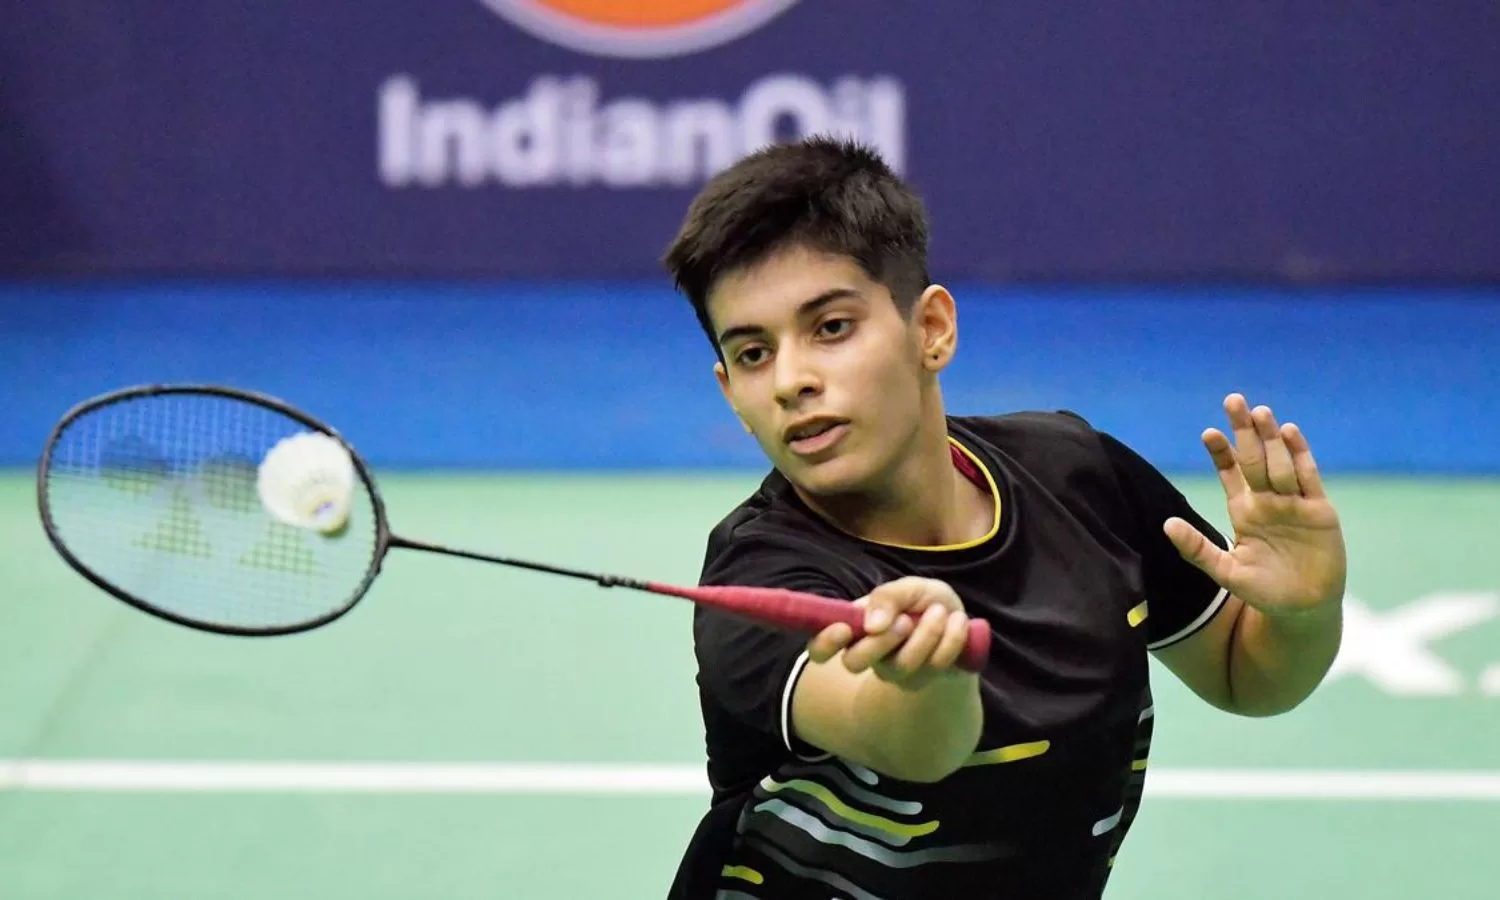 Anmol Kharb bows out in quarters